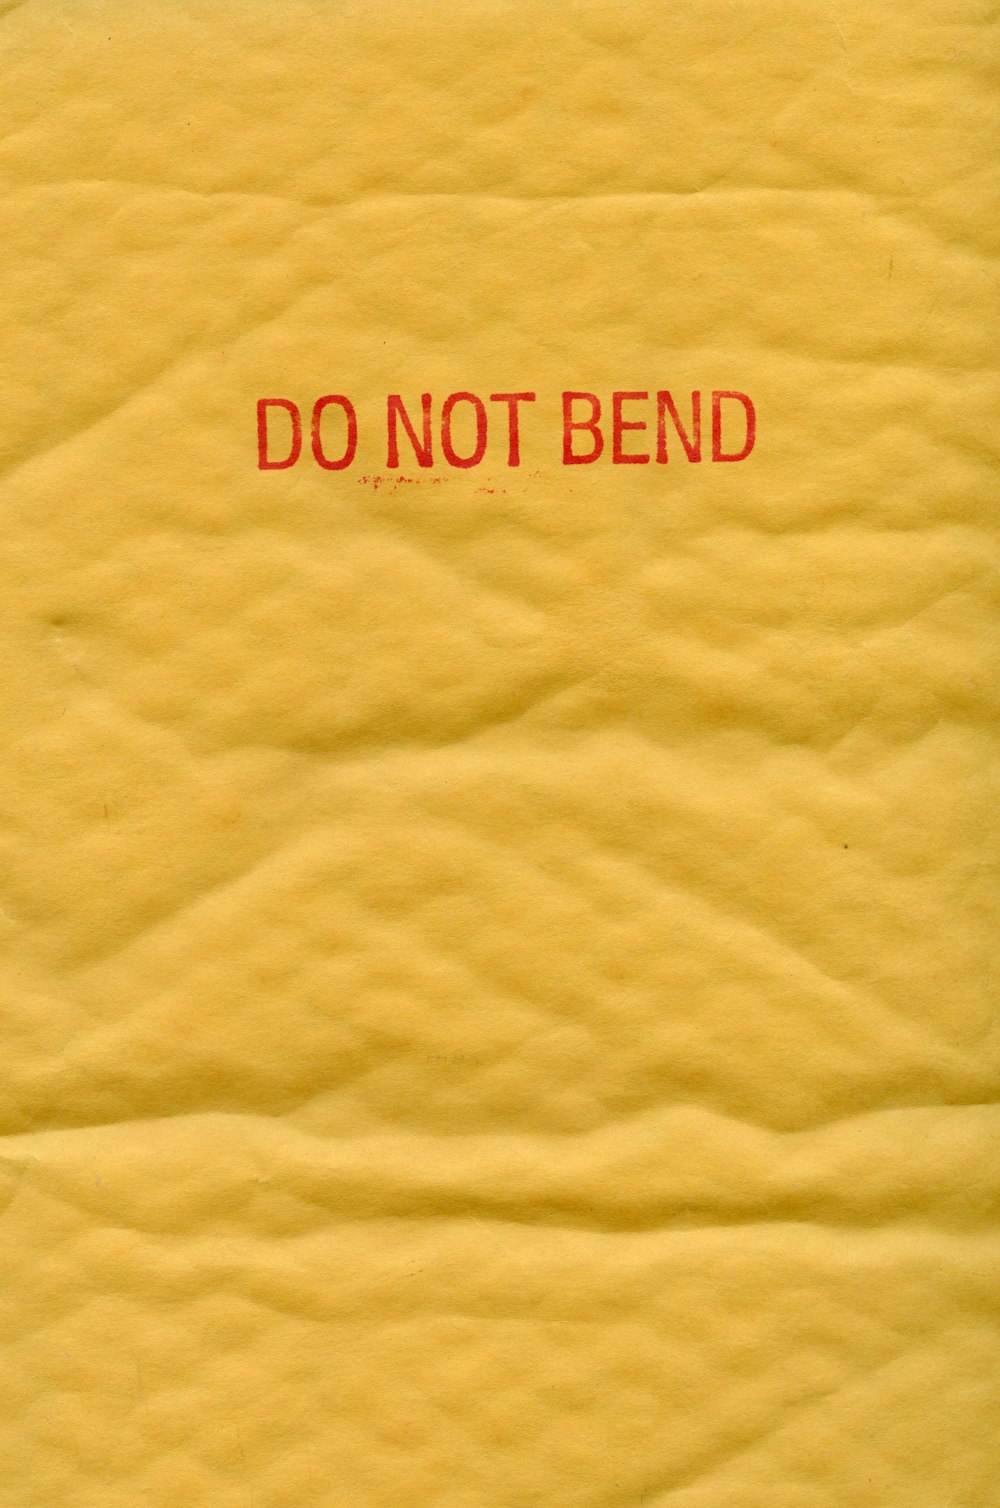 a piece of yellow paper with a red do not bend sign on it